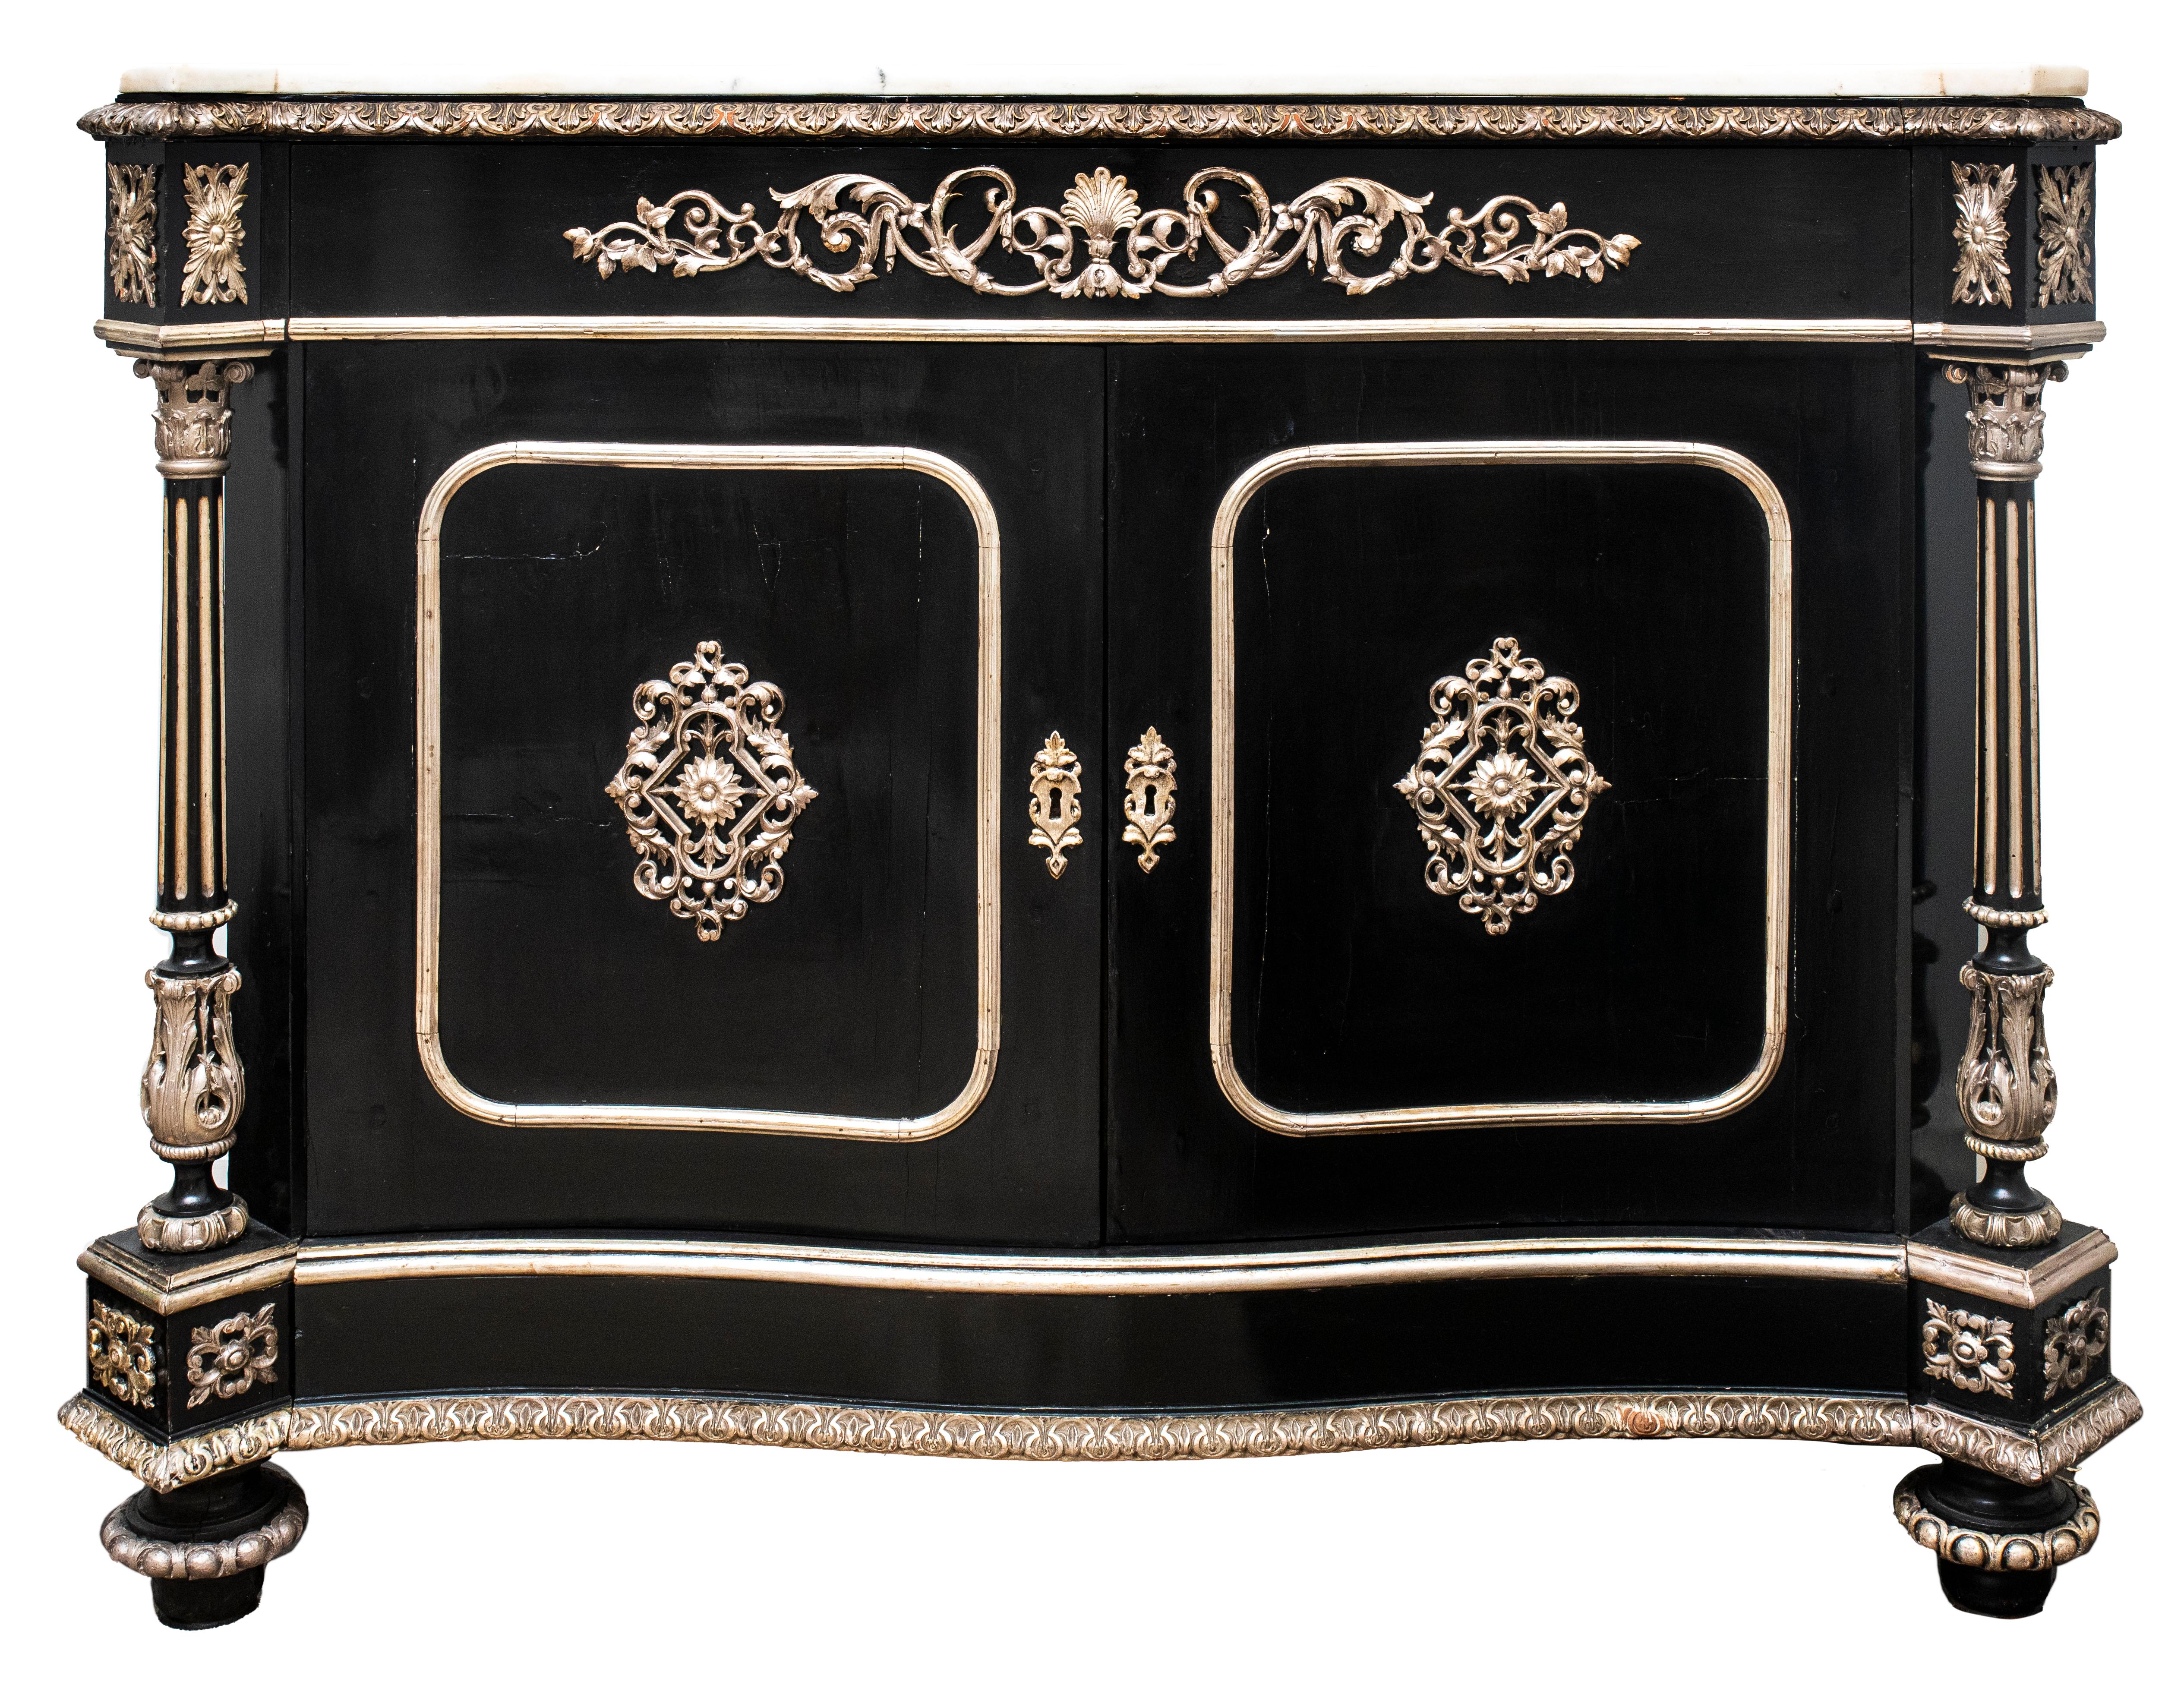 Napoleon III French Second Empire pair of monumental ebonized and parcel silvered meuble d'appui cabinets, each with white marble top, long drawer over pair of doors opening up to three interior burlwood drawers, flanked by fluted columns. Priced